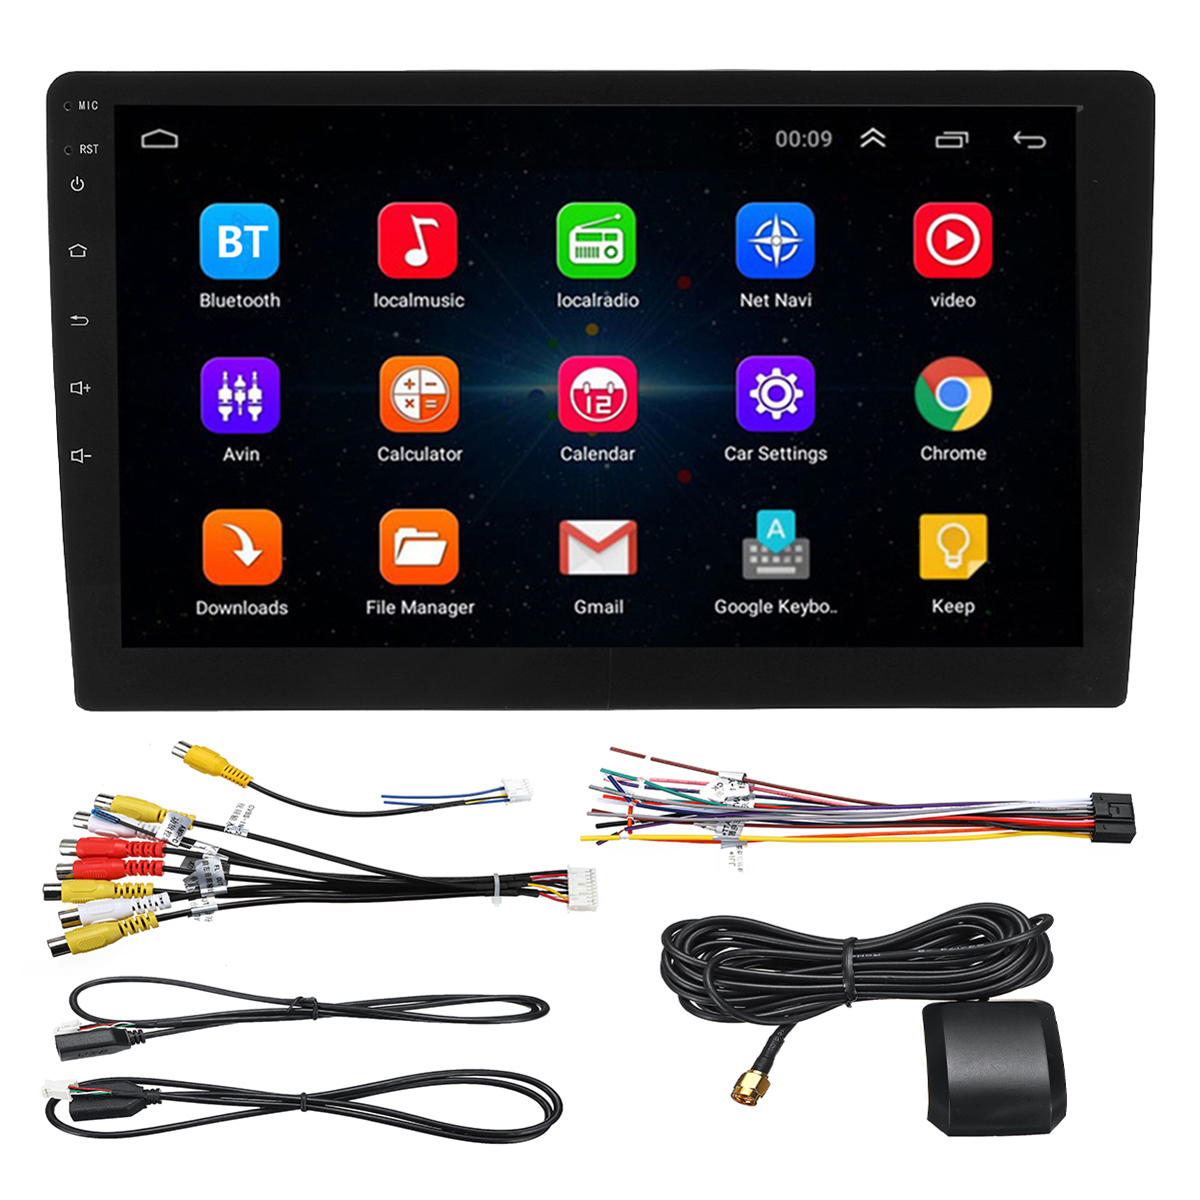 101-Inch-Android-81-System-Car-GPS-Navigation-Bluetooth-Car-MP5-Player-1421913